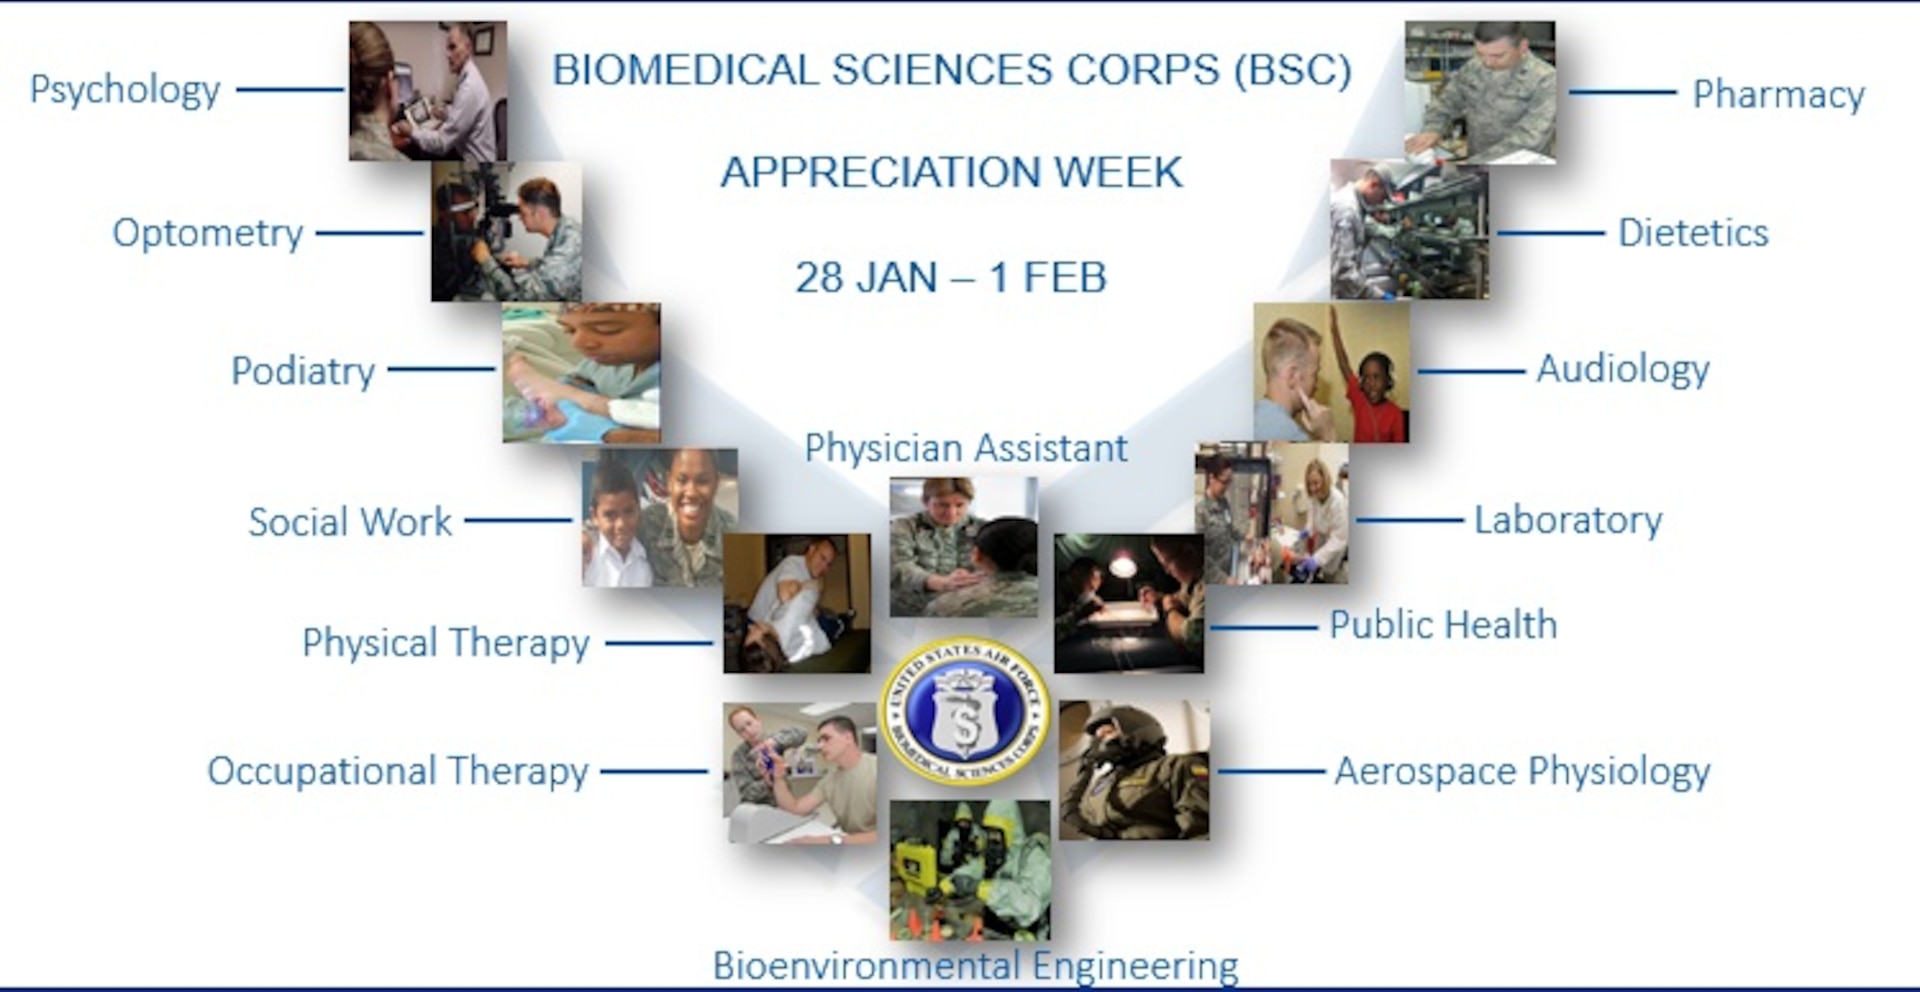 The Air Force and Joint Base San Antonio celebrate the 54th Anniversary of the Biomedical Science Corps by designating the week of Jan. 28 through Feb. 1 as BSC Appreciation Week.